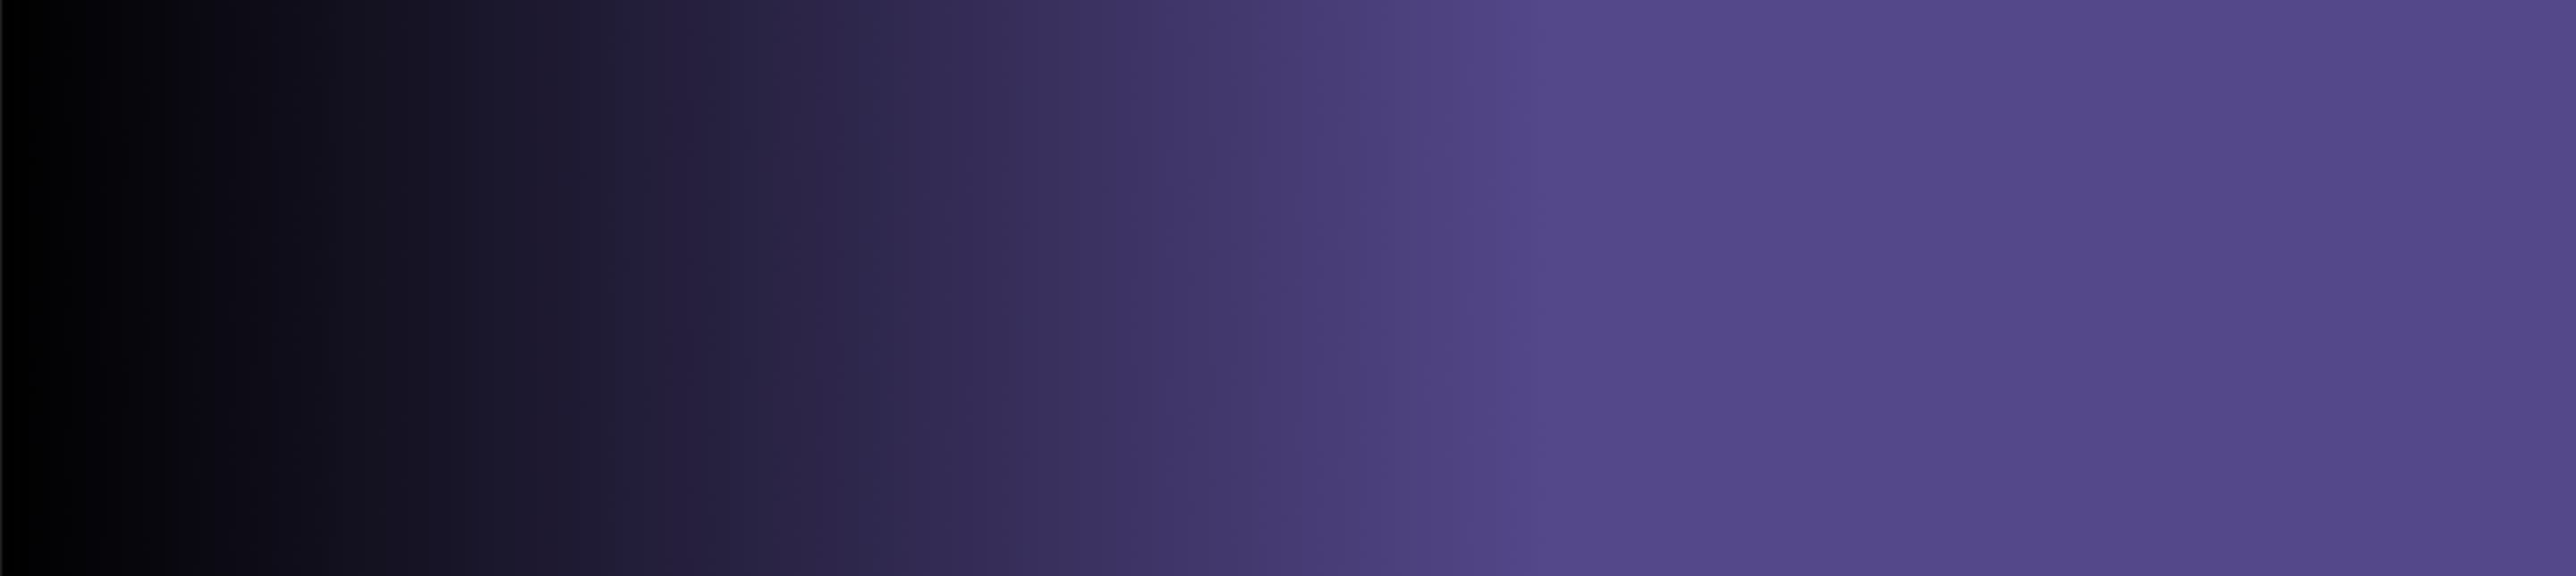 Abstract background with a smooth gradient transitioning from dark purple at the top to blue at the bottom.